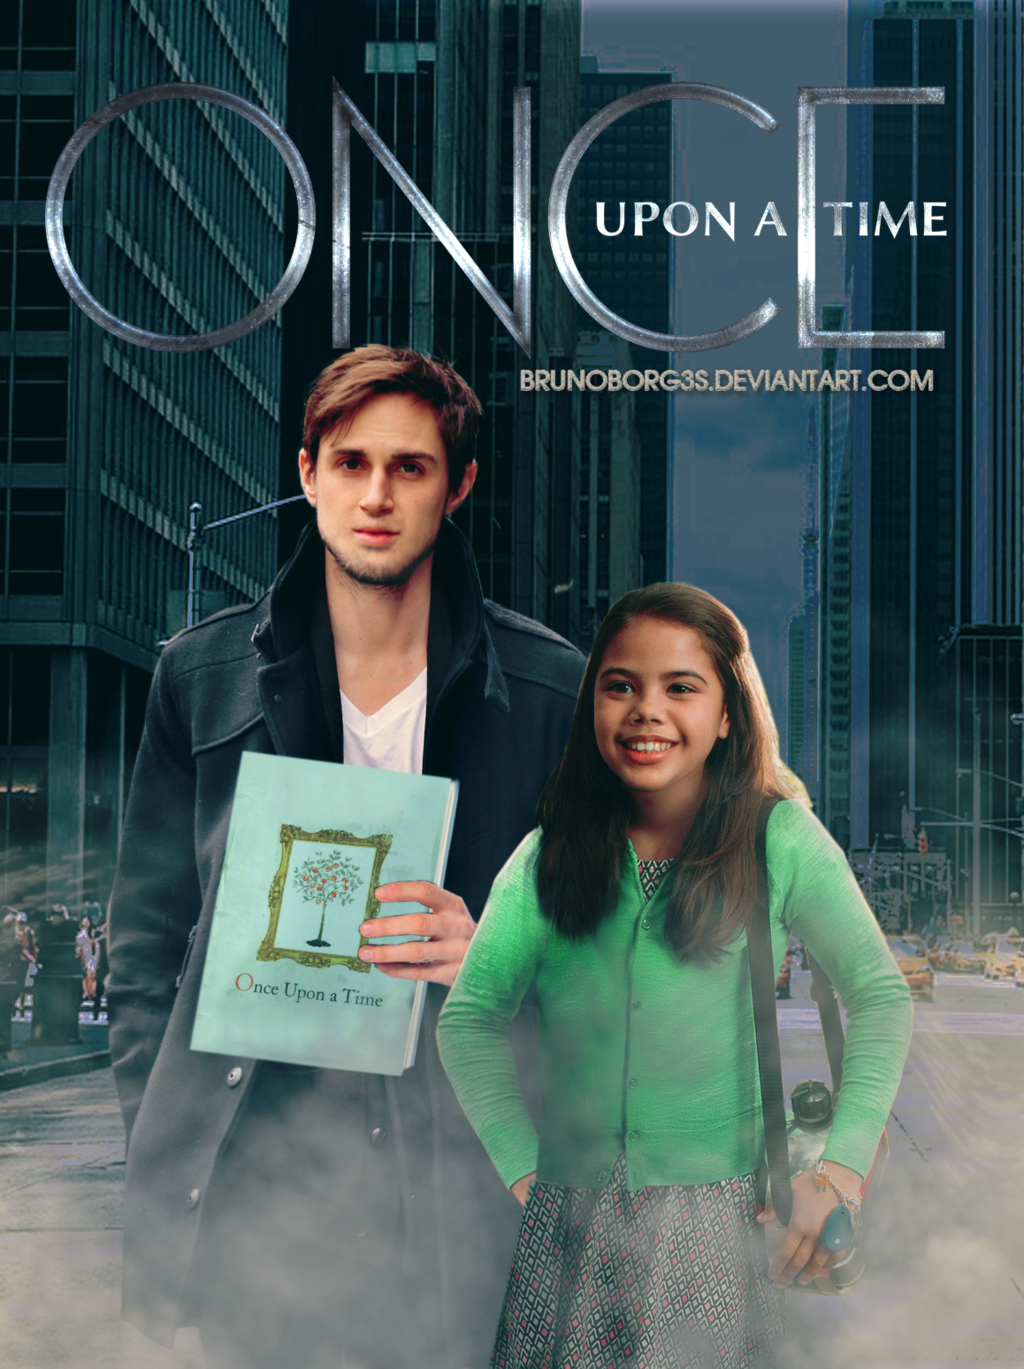 Once Upon A Time Season Poster By Brunoborg3s